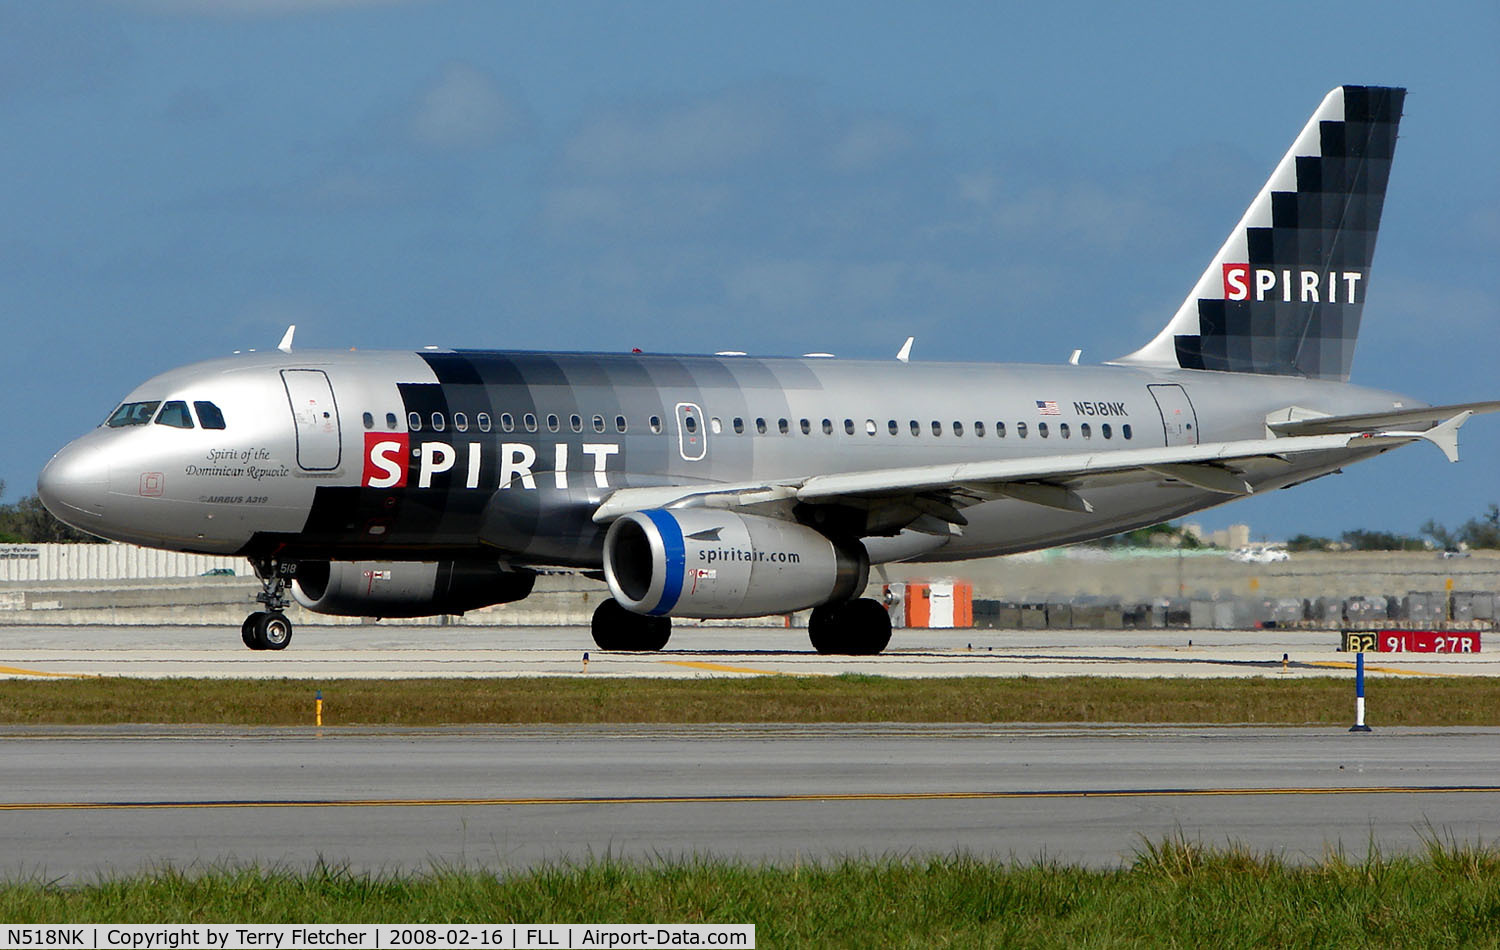 N518NK, 2006 Airbus A319-132 C/N 2718, Spirit A319 about to depart from FLL